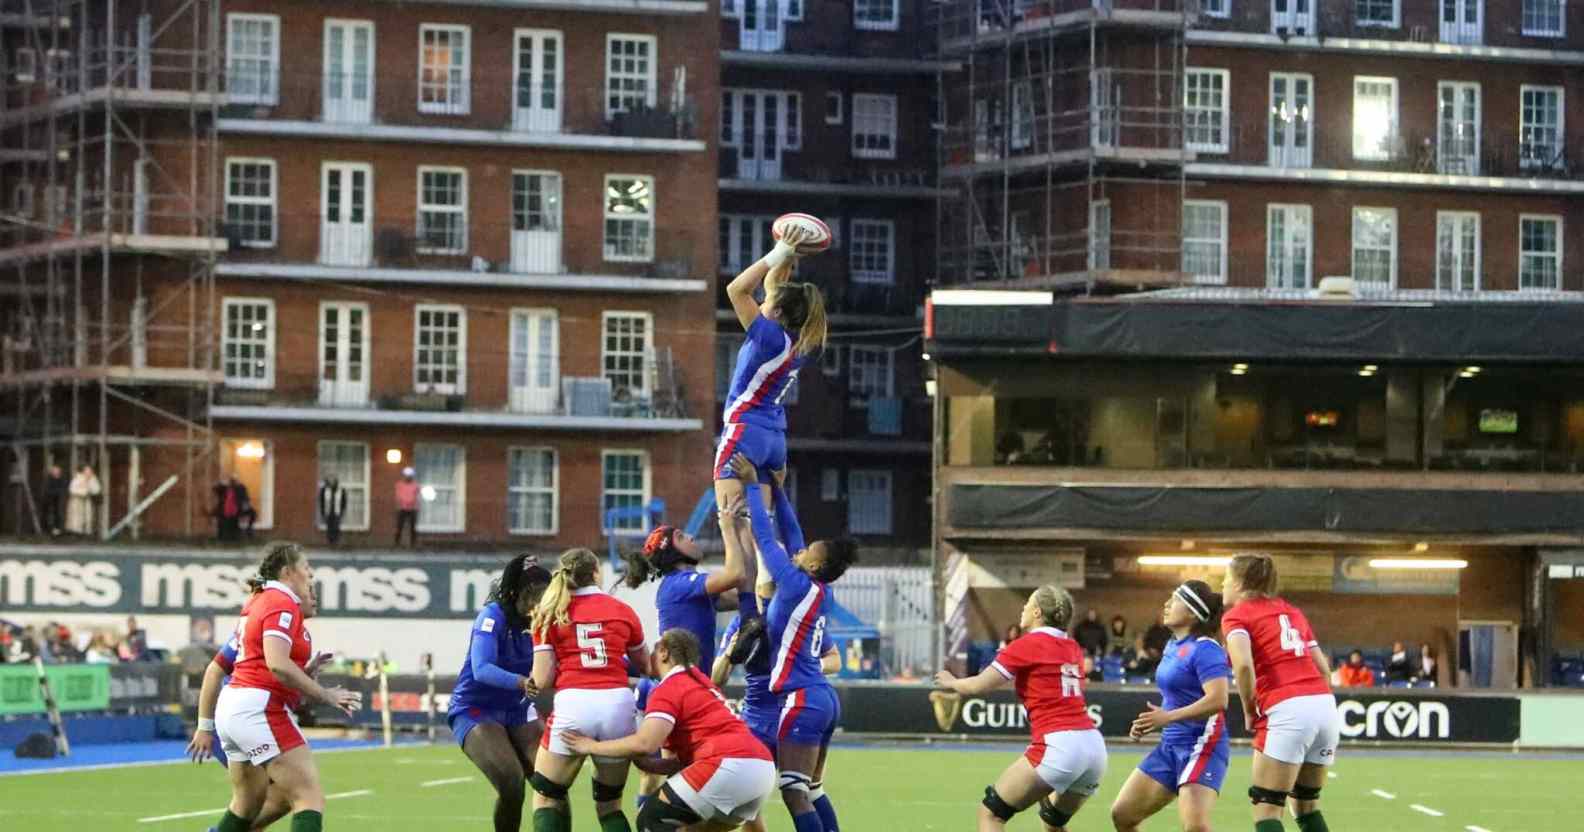 Female rugby in the air catching the ball